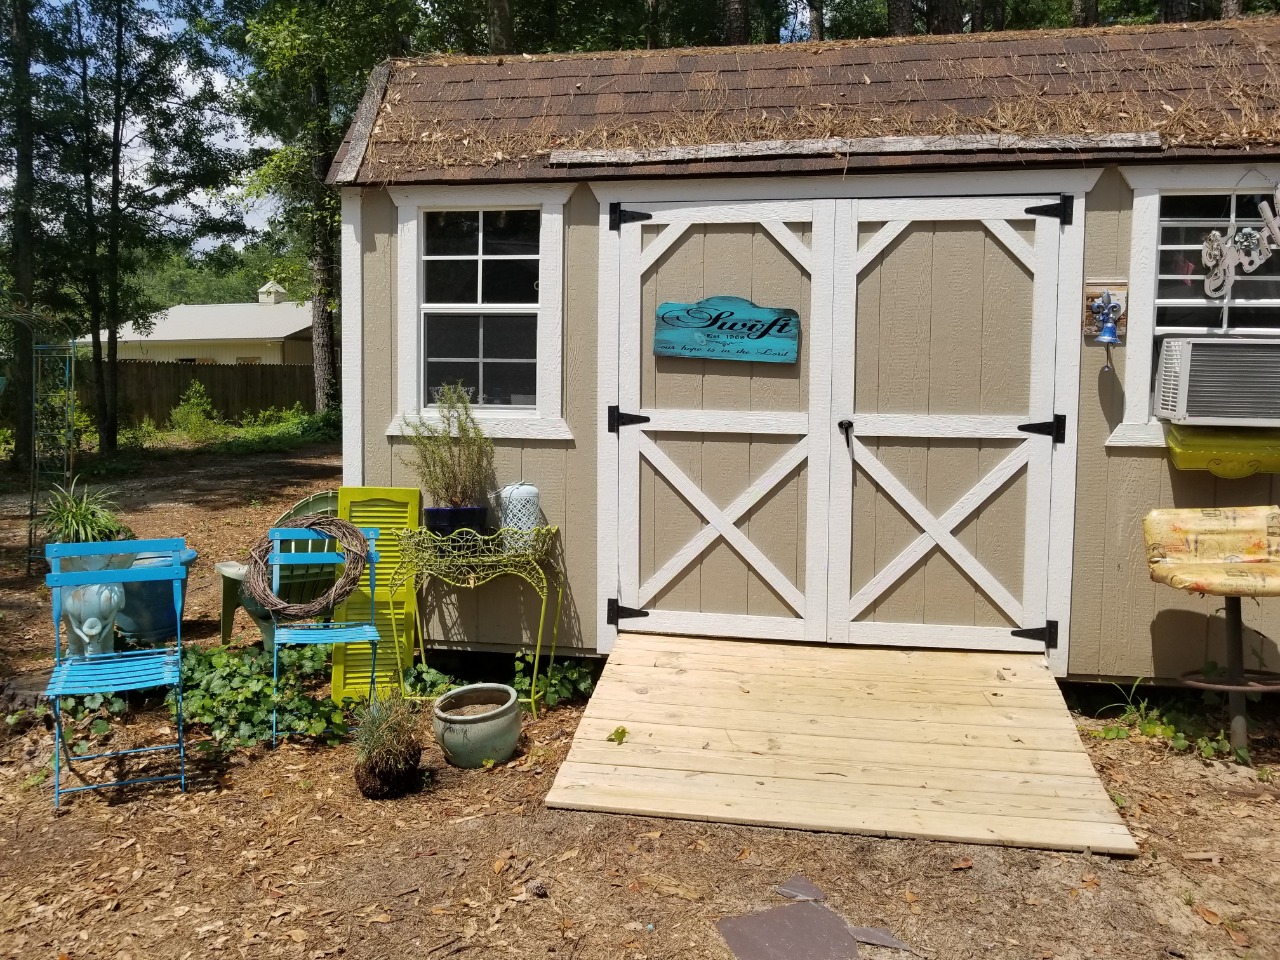 Exterior of Aunt Laurie's she shed in Aiken South Carolina